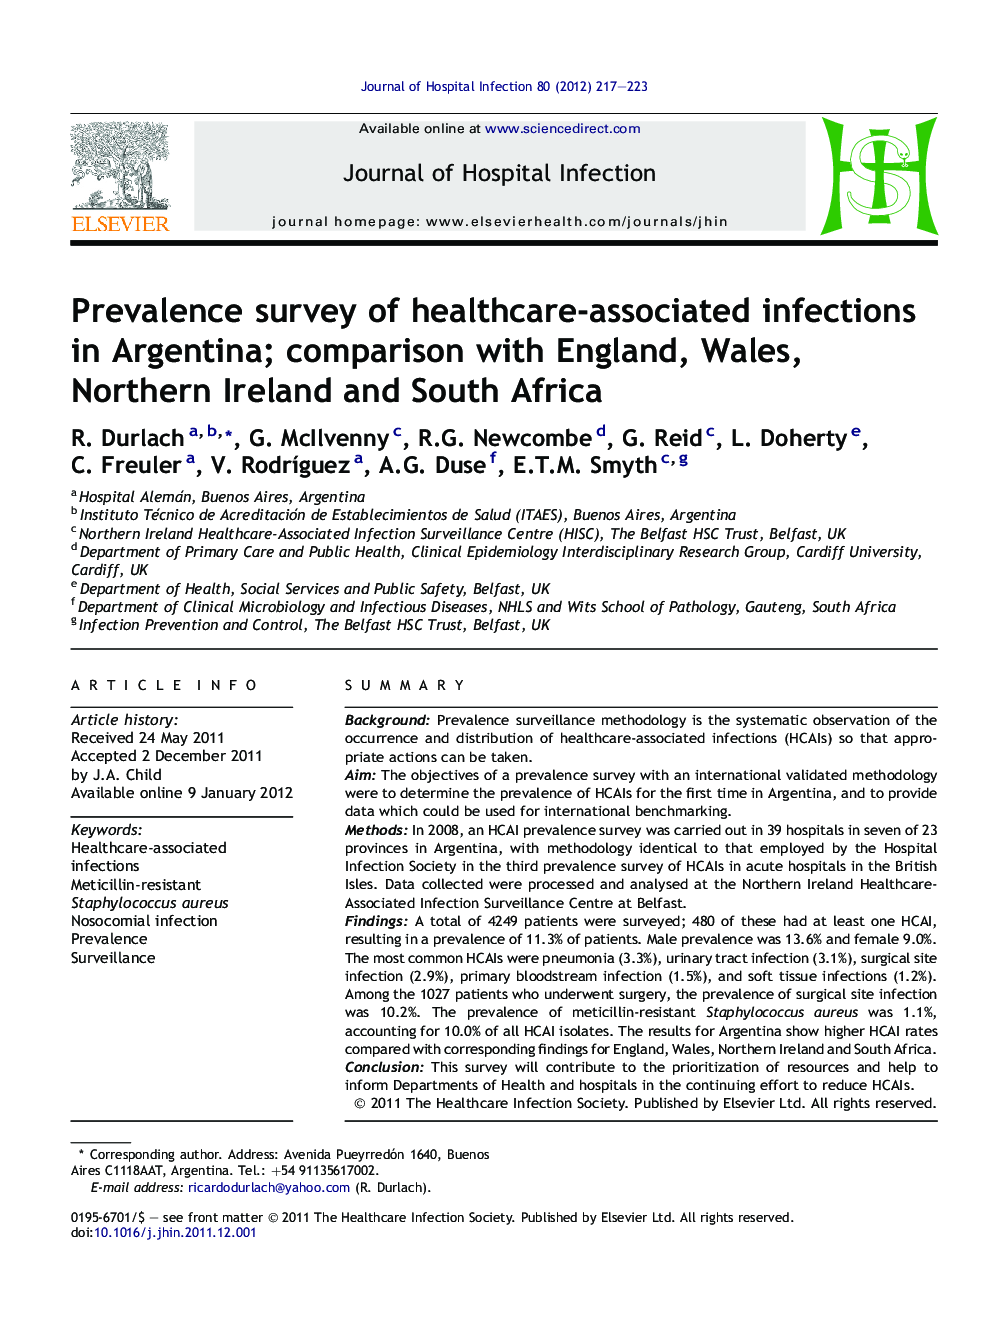 Prevalence survey of healthcare-associated infections in Argentina; comparison with England, Wales, Northern Ireland and South Africa